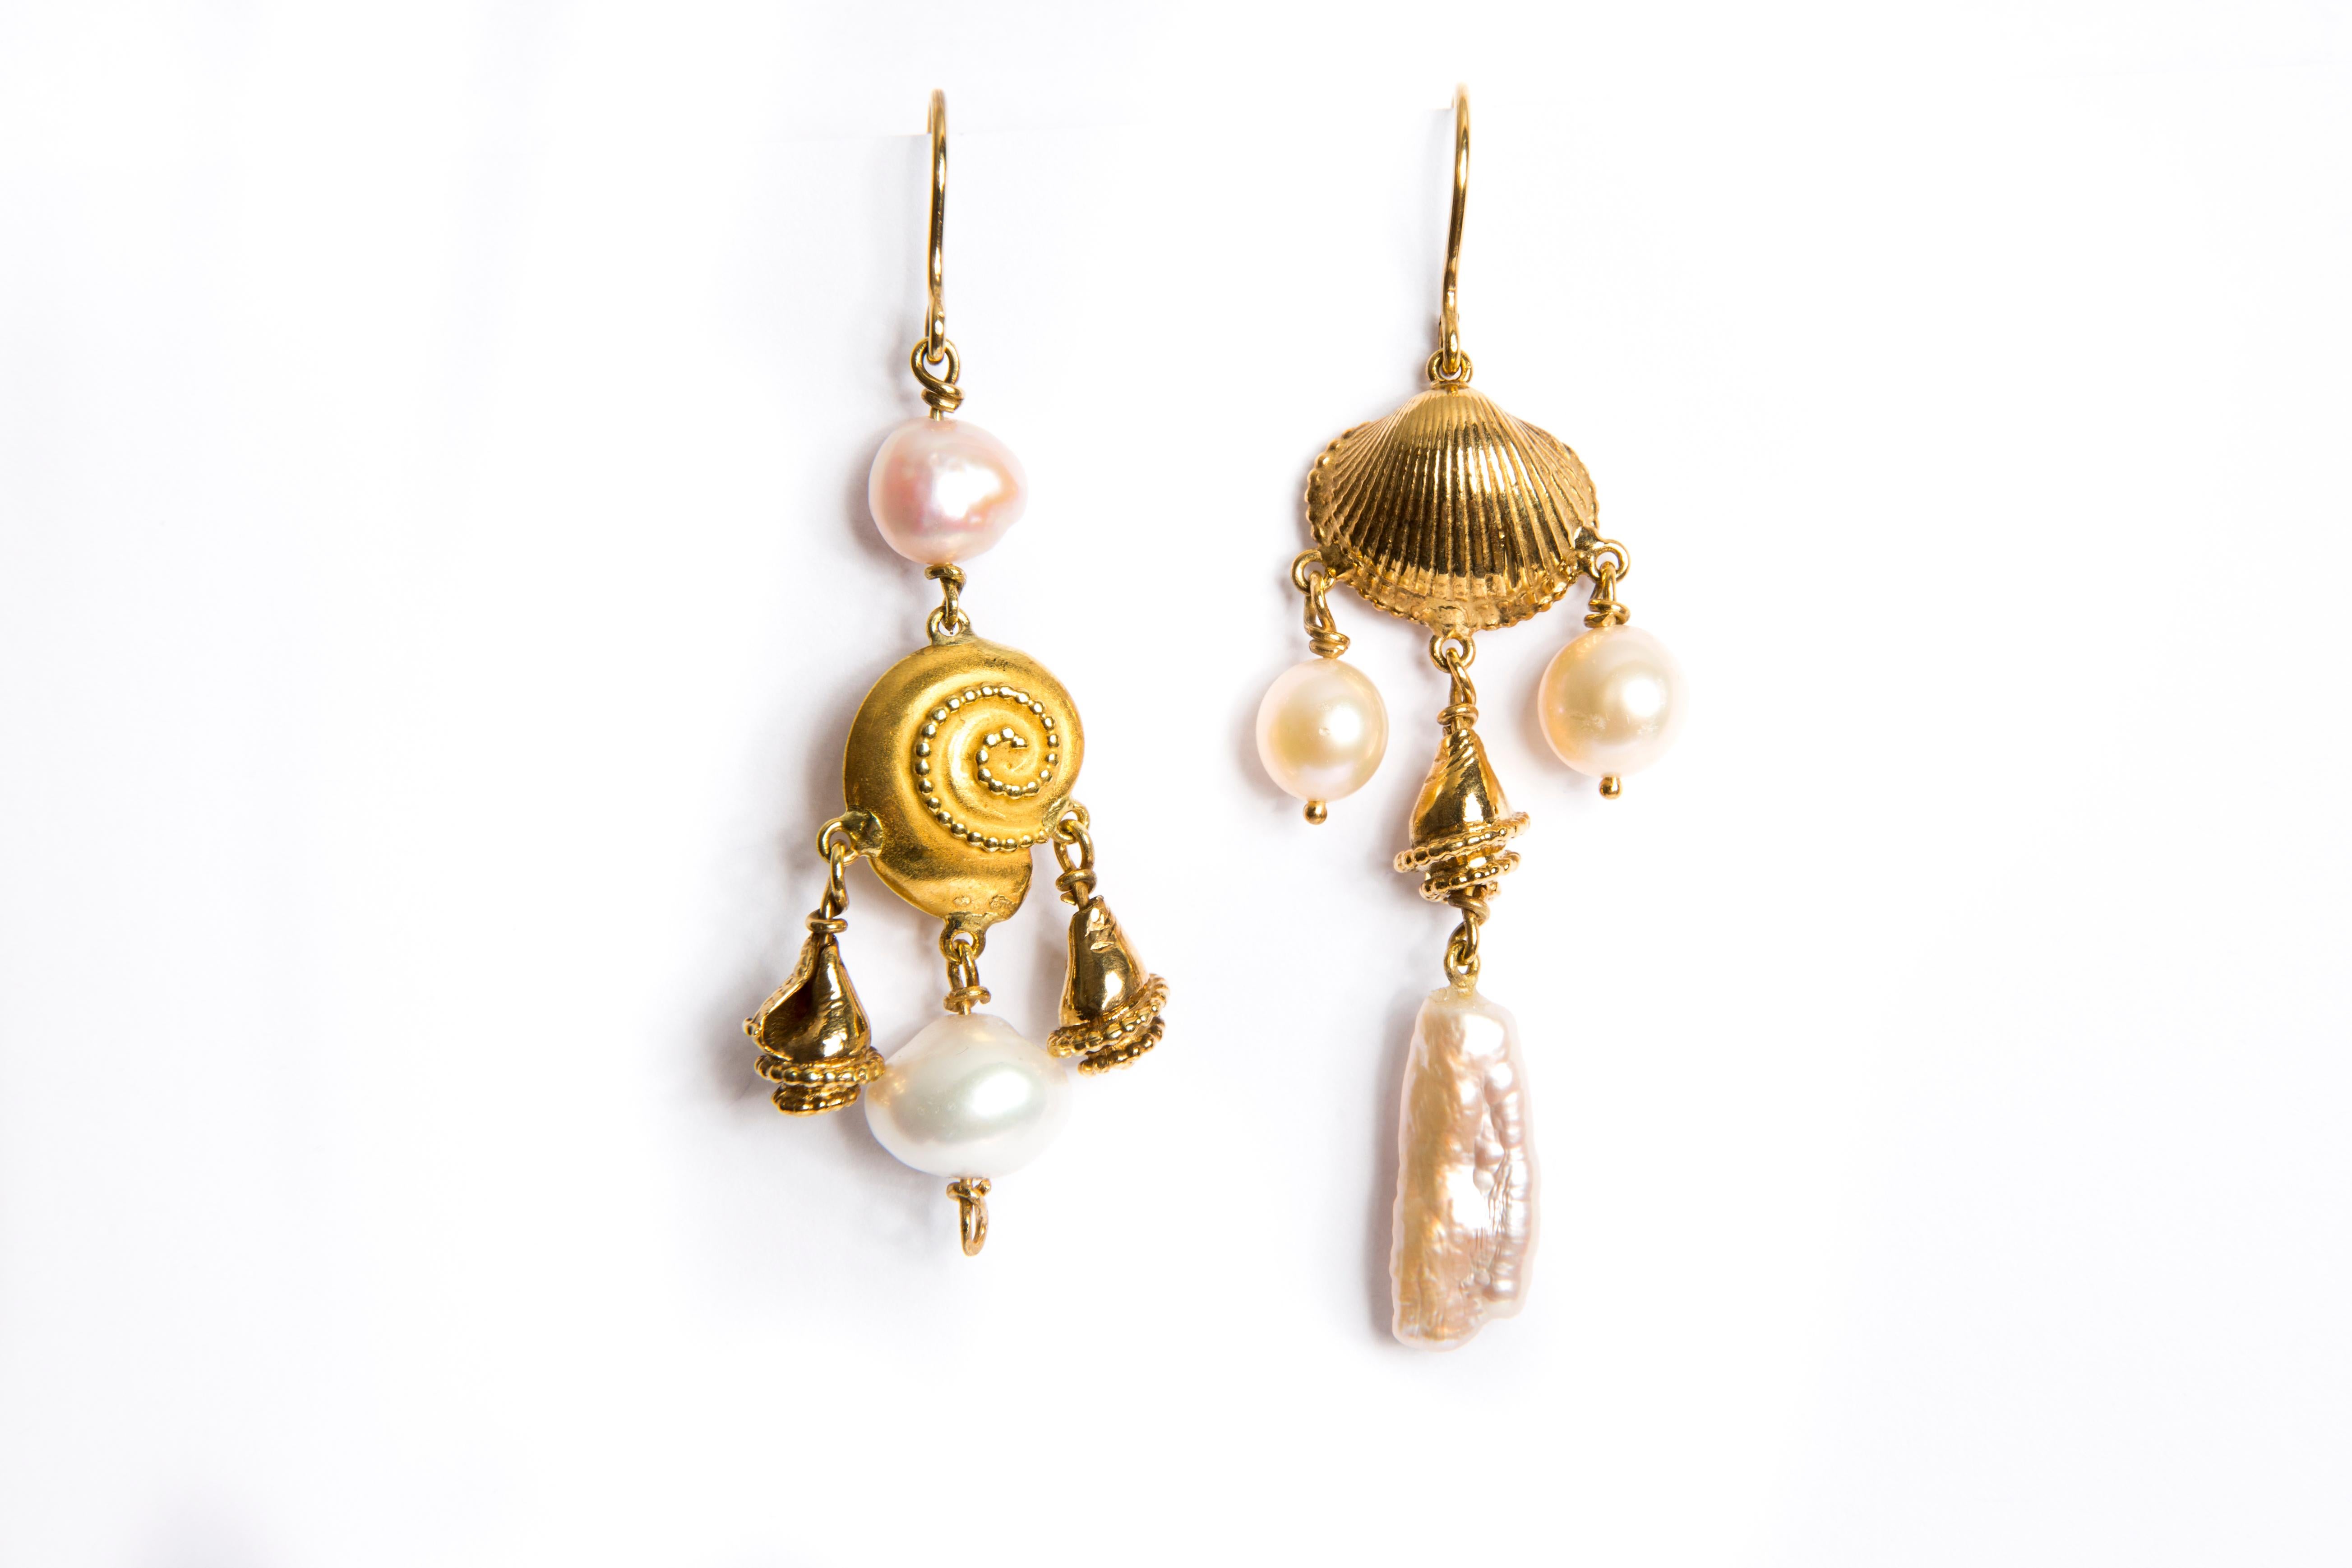 Our beautiful range of ocean collection is featuring these exceptional earrings with cultured pearls. Beautiful natural shell handcrafted with yellow gold 18K that will distinguish perfectly your natural elegance.
An exclusive item designed with